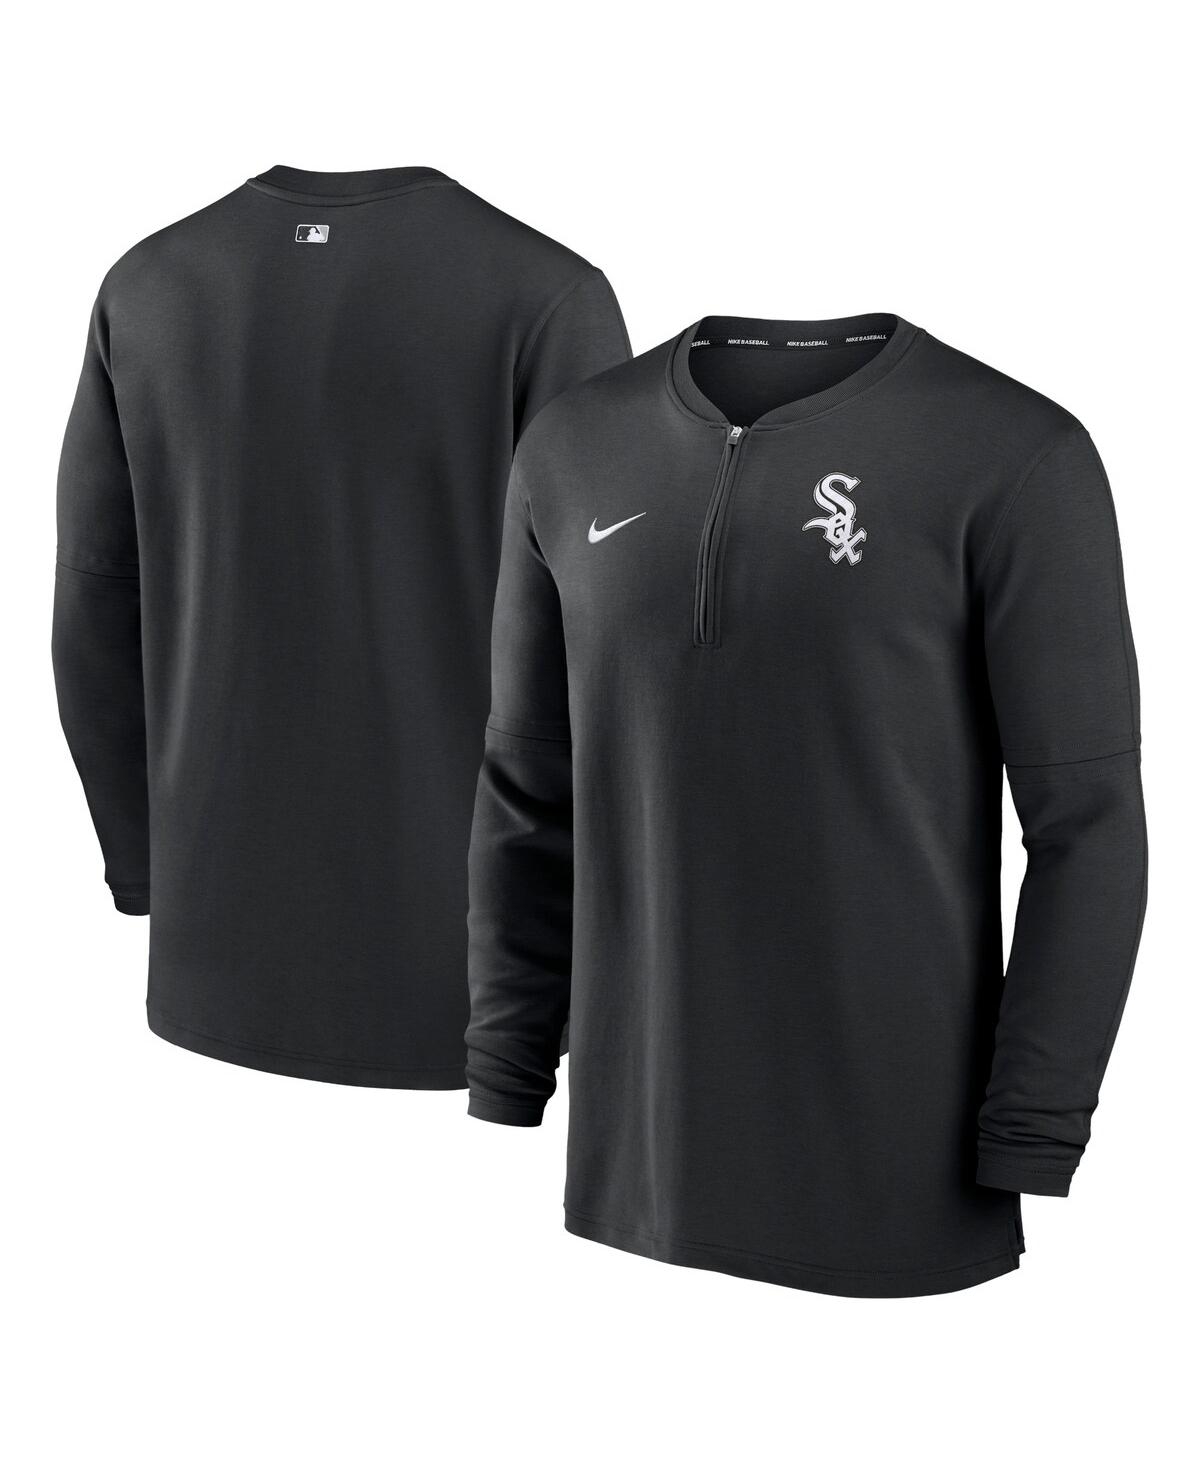 Nike Men's  Black Chicago White Sox Authentic Collection Game Time Performance Quarter-zip Top